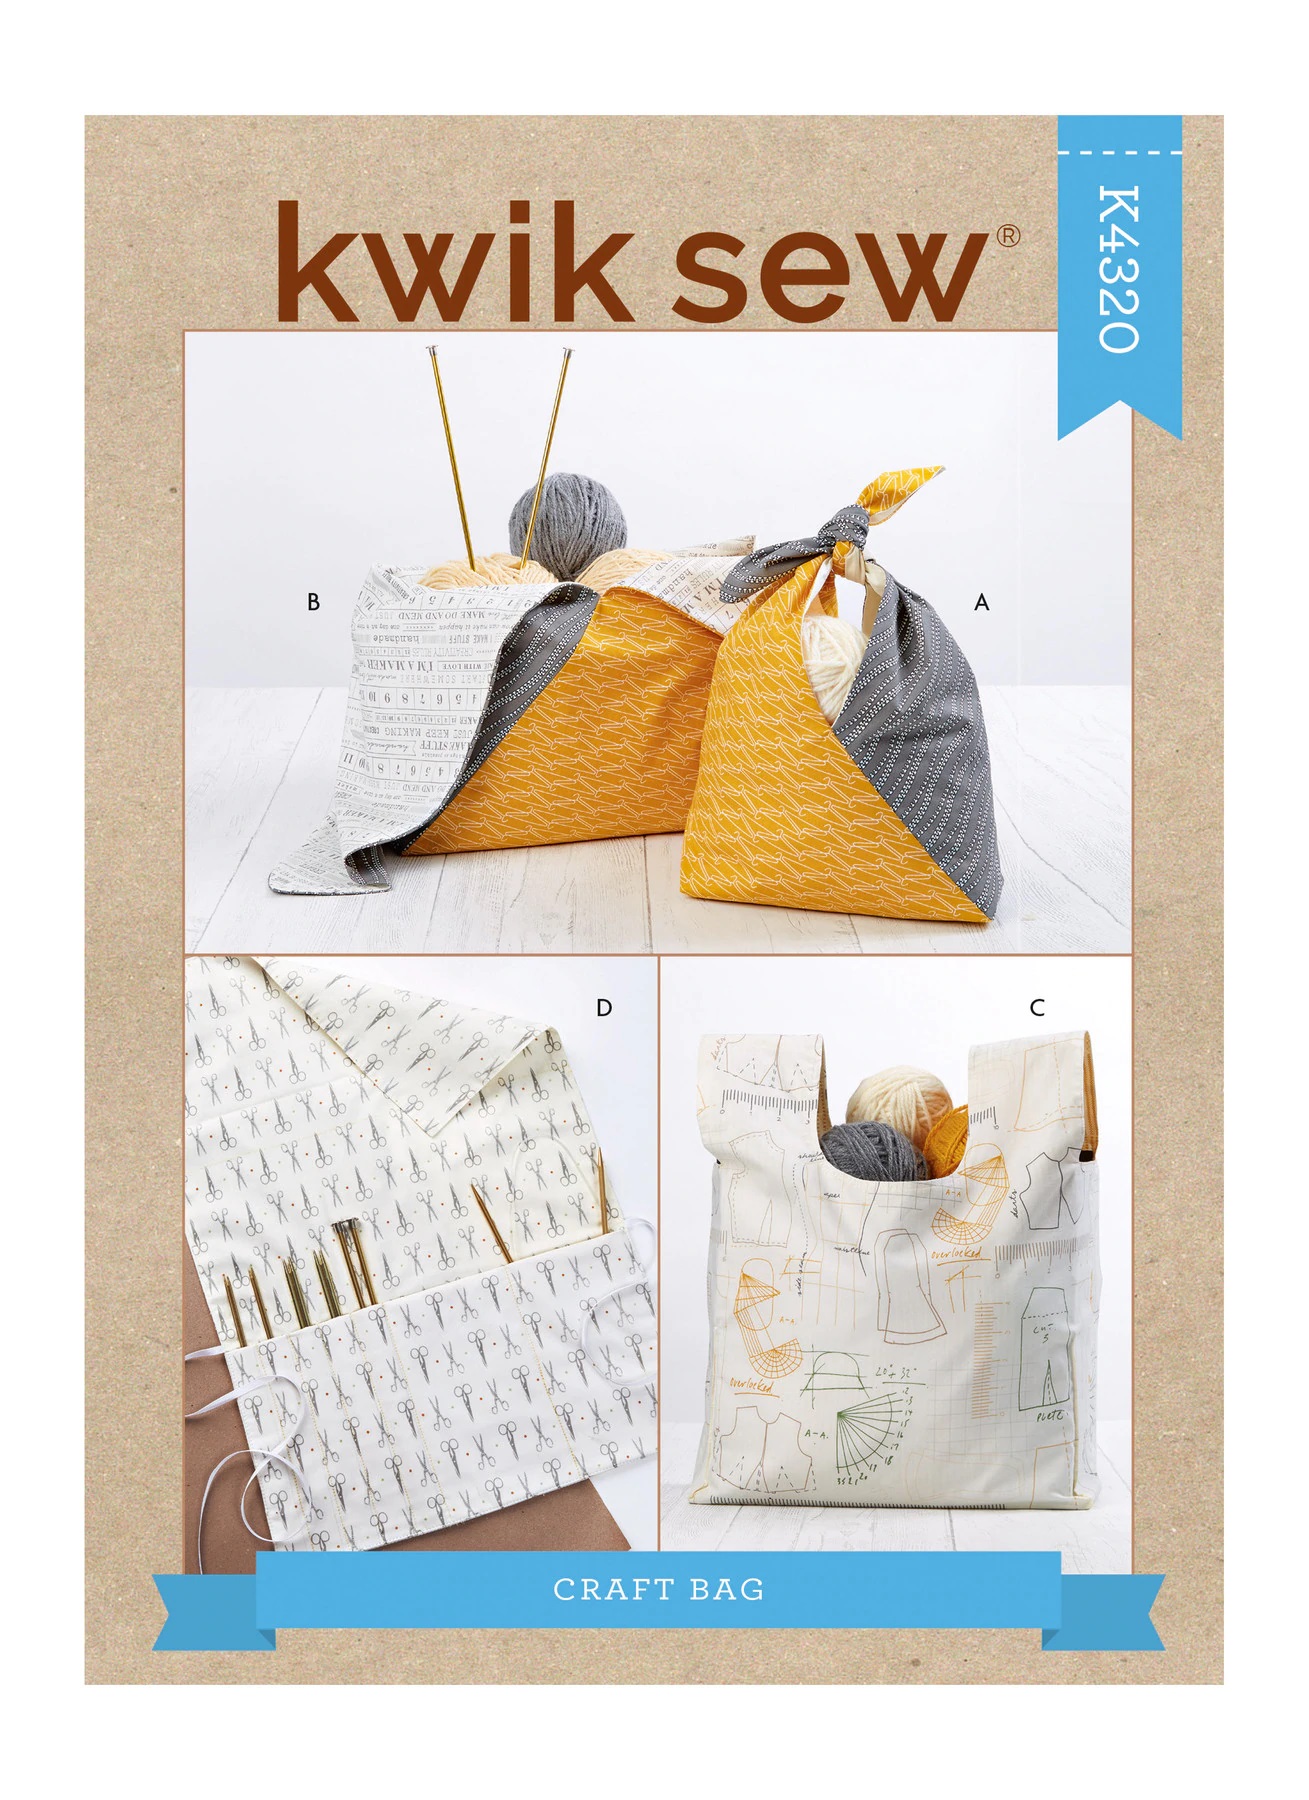 https://images.patternreview.com/sewing/patterns/kwiksew/2020/4320/4320.jpg